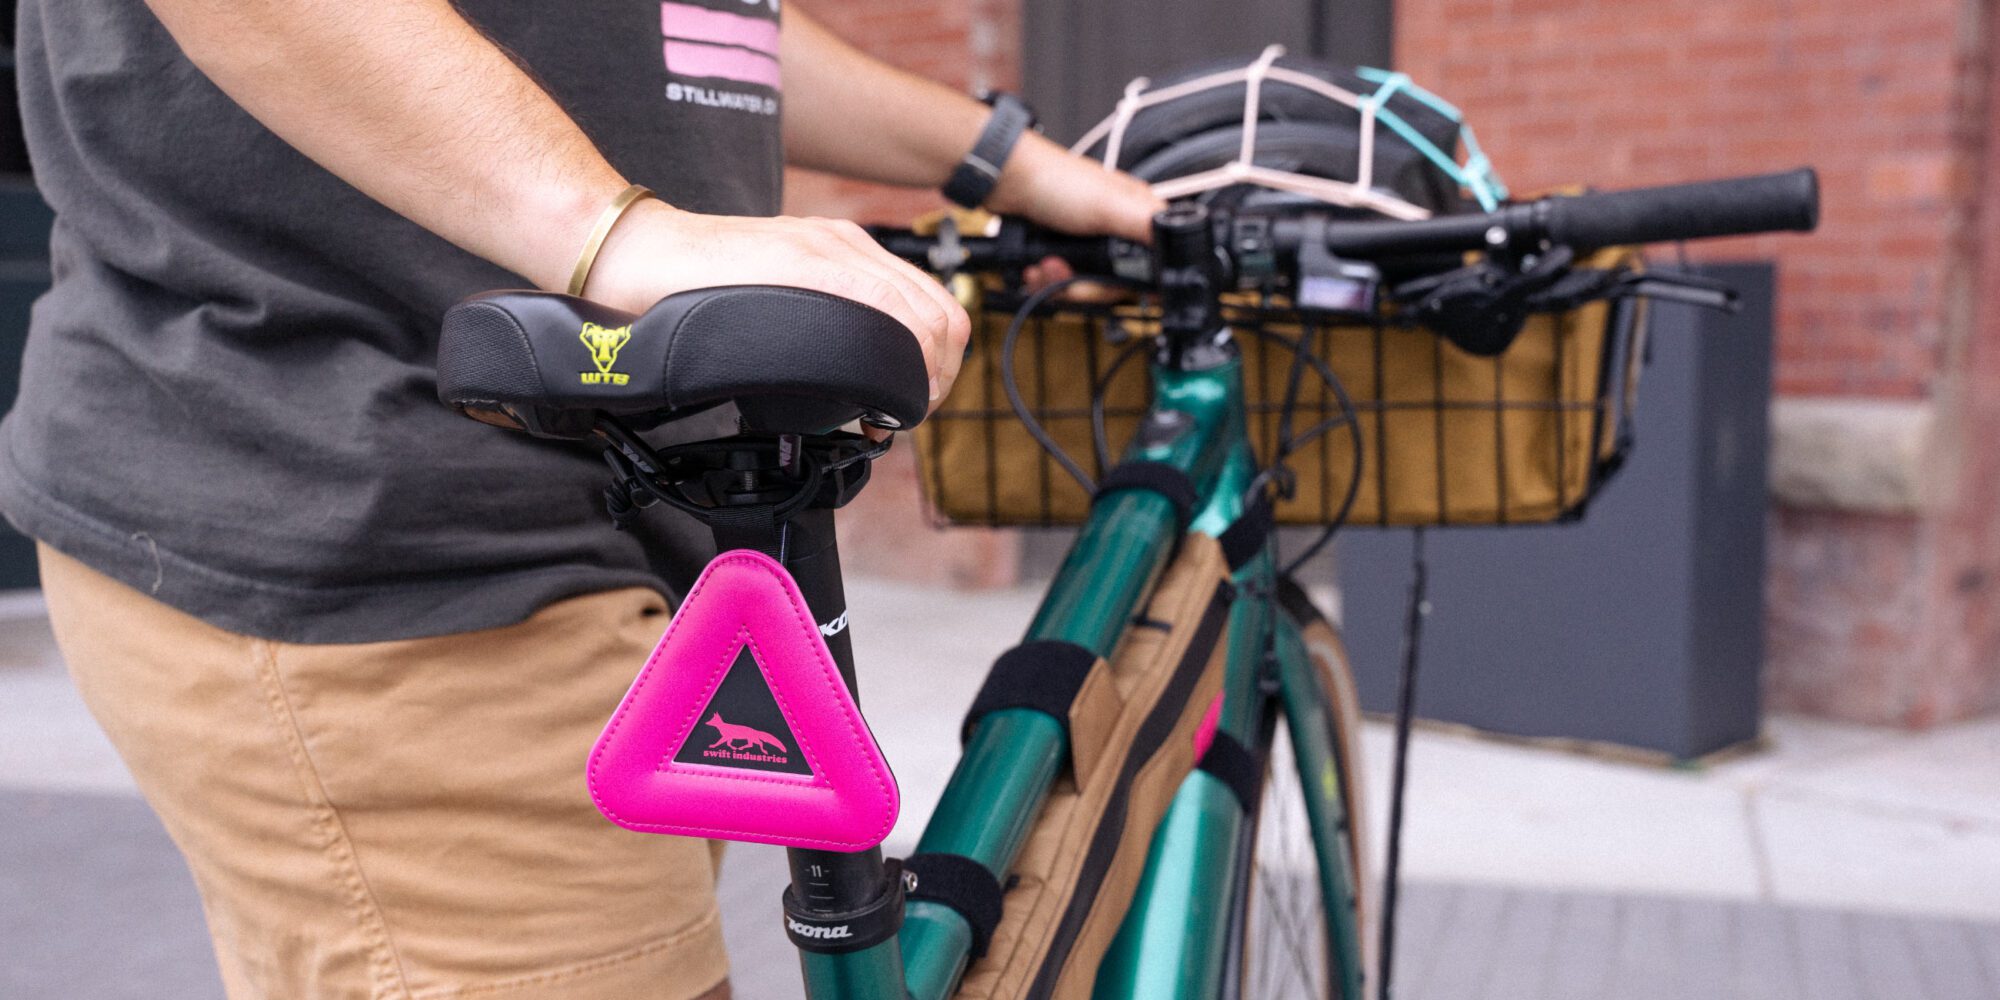 best place to buy bike accessories online